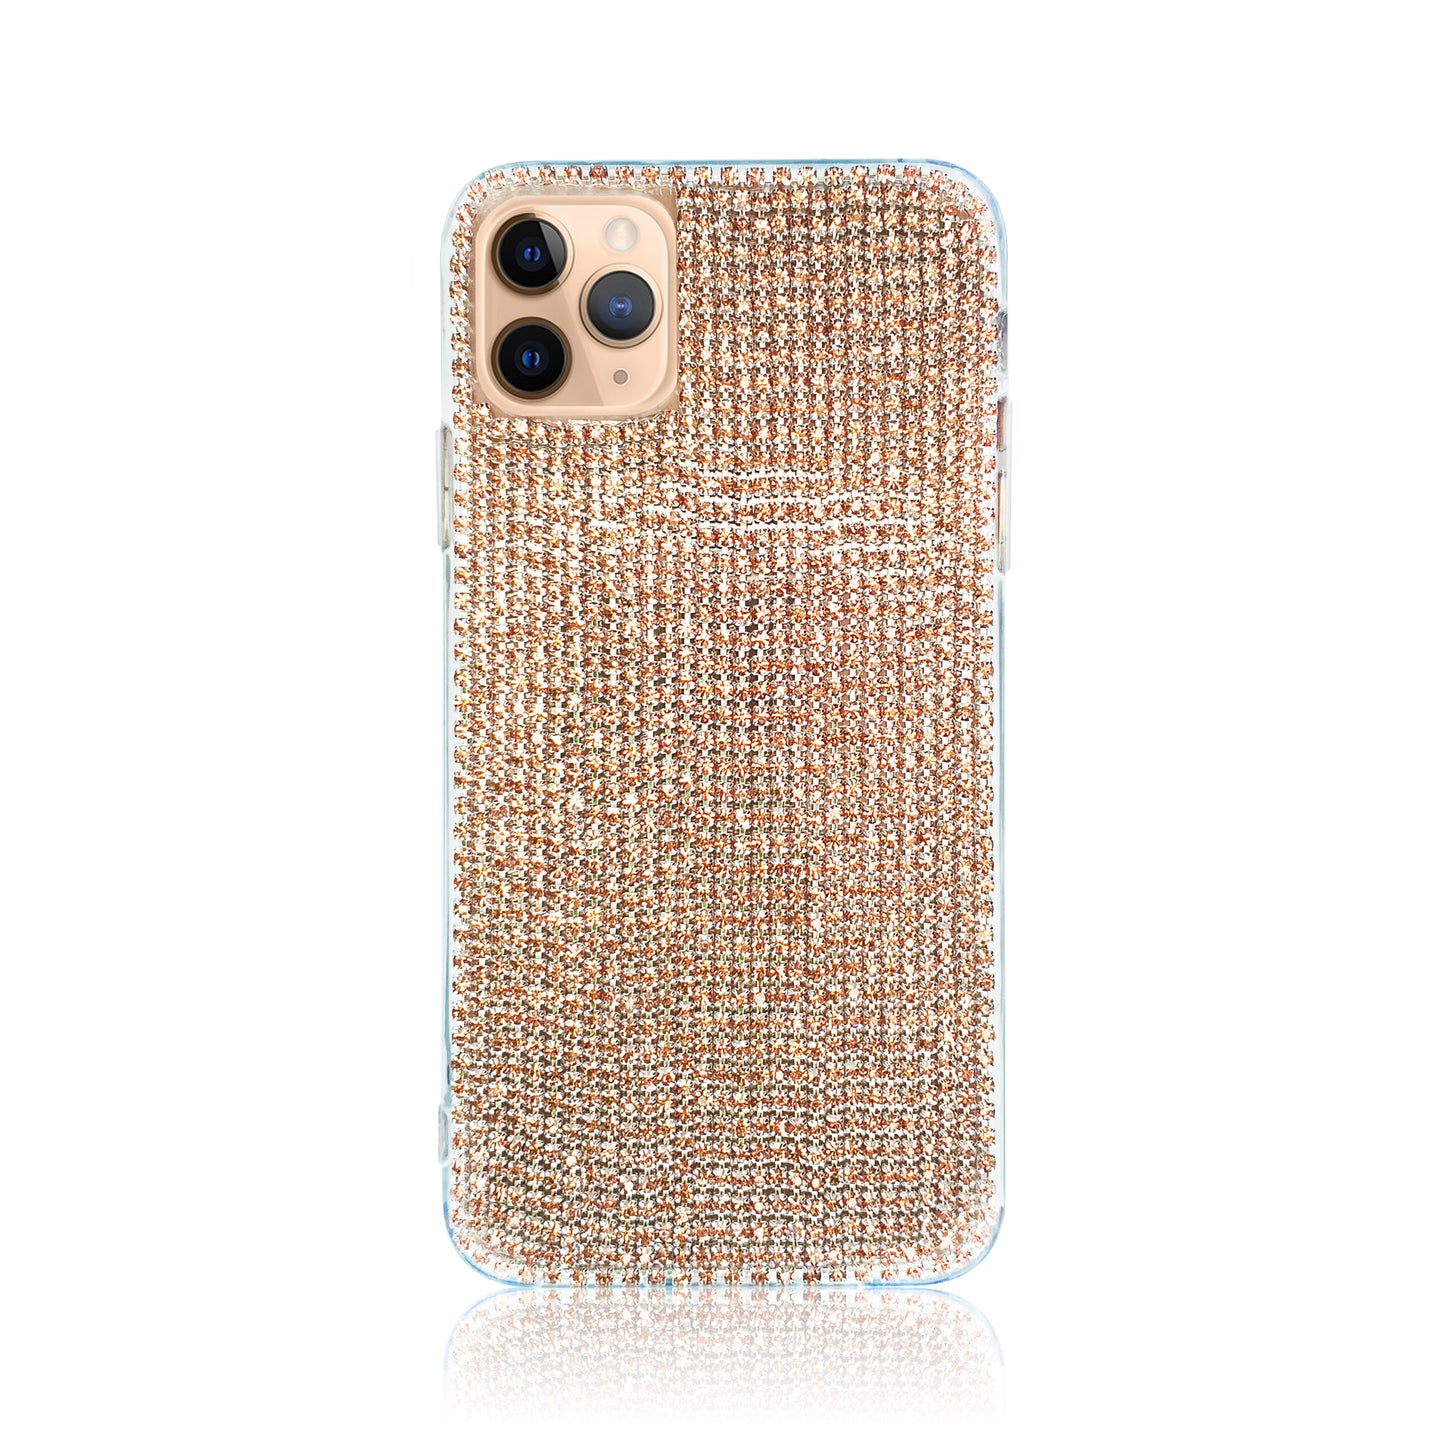 Crystal Rose Gold Silicon iPhone Case